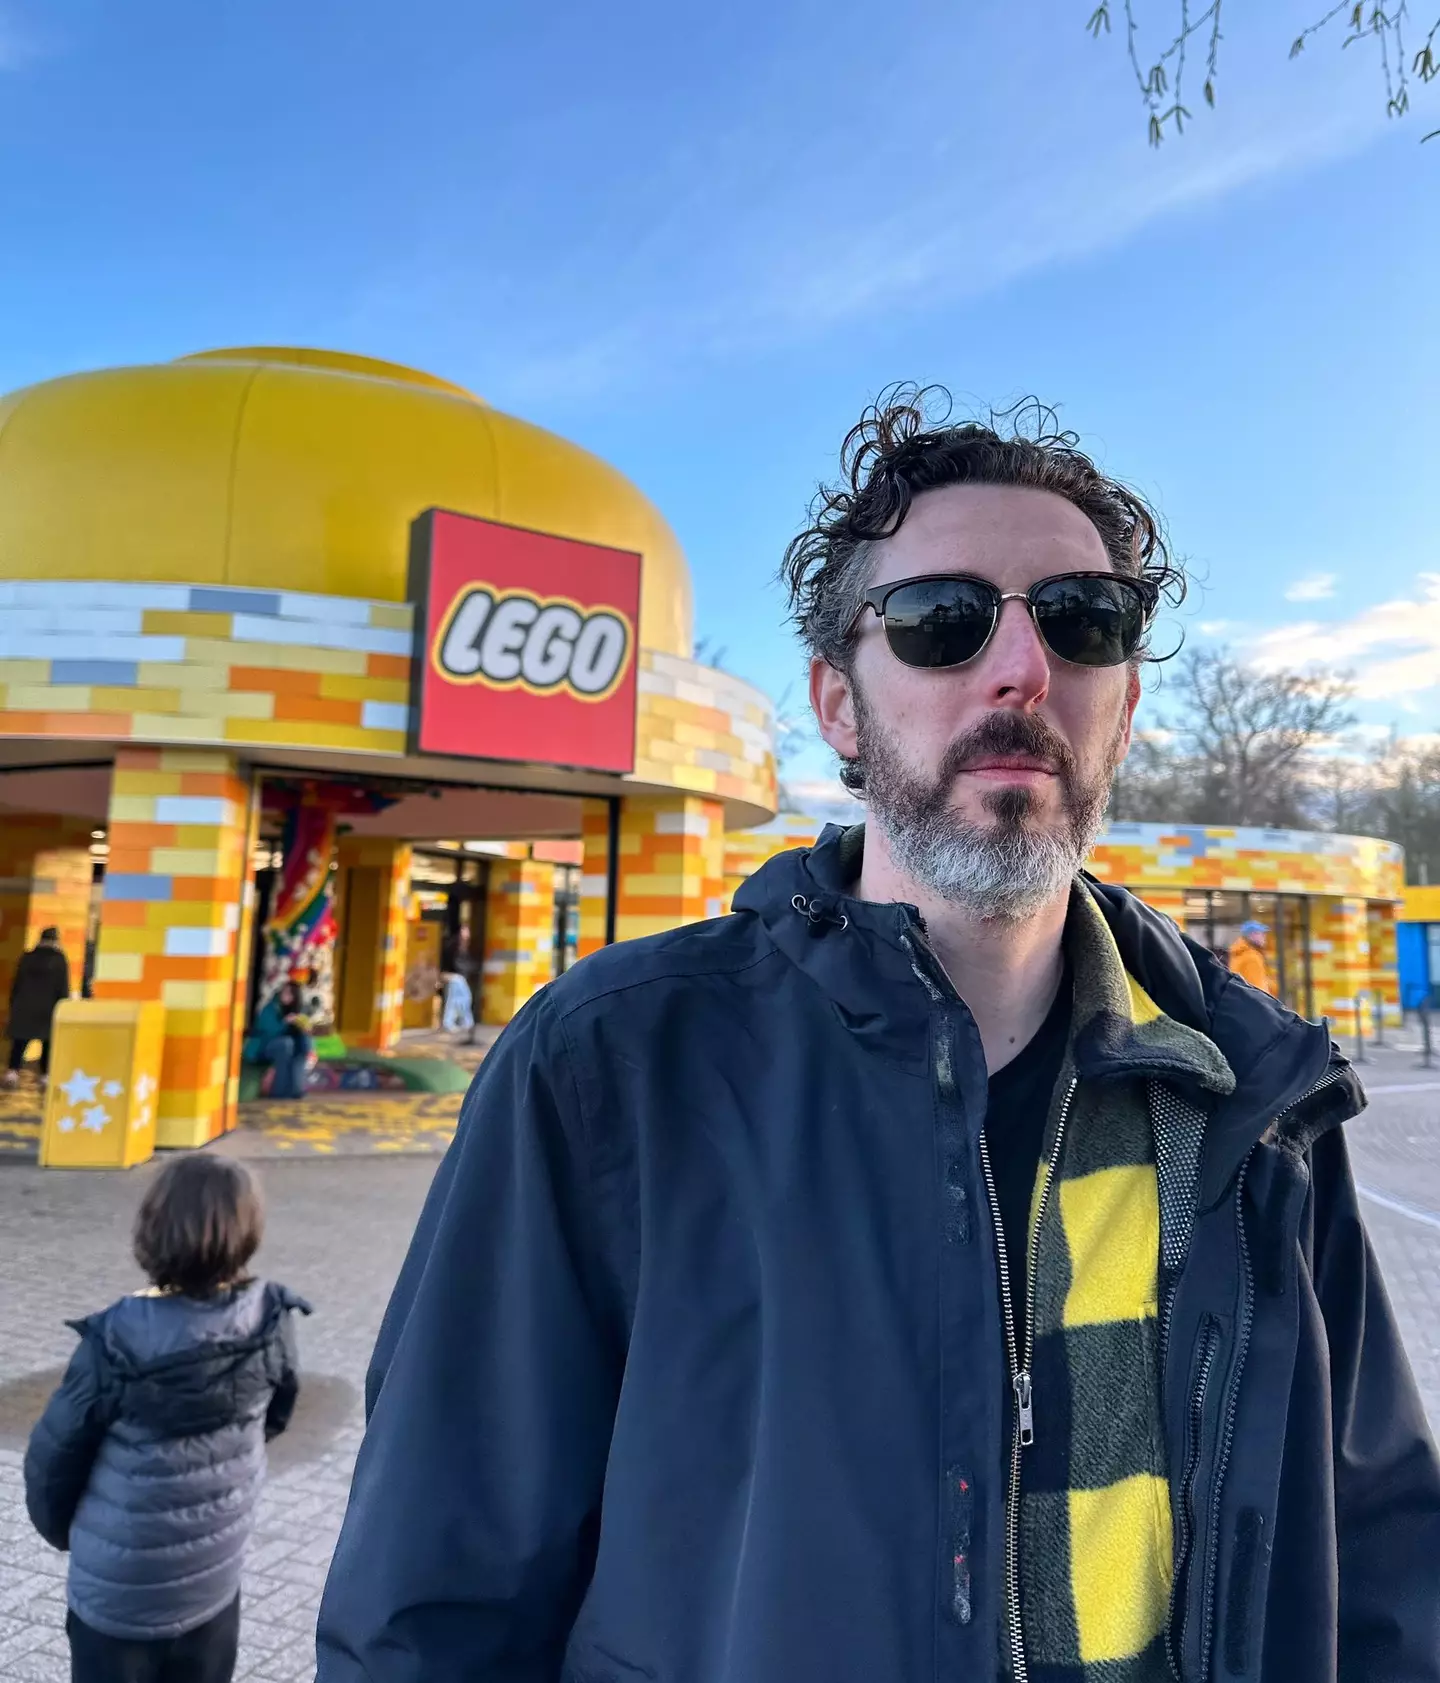 Fans were in hysterics after Inbetweeners actor Blake Harrison posted a picture of himself in front of a Lego store.